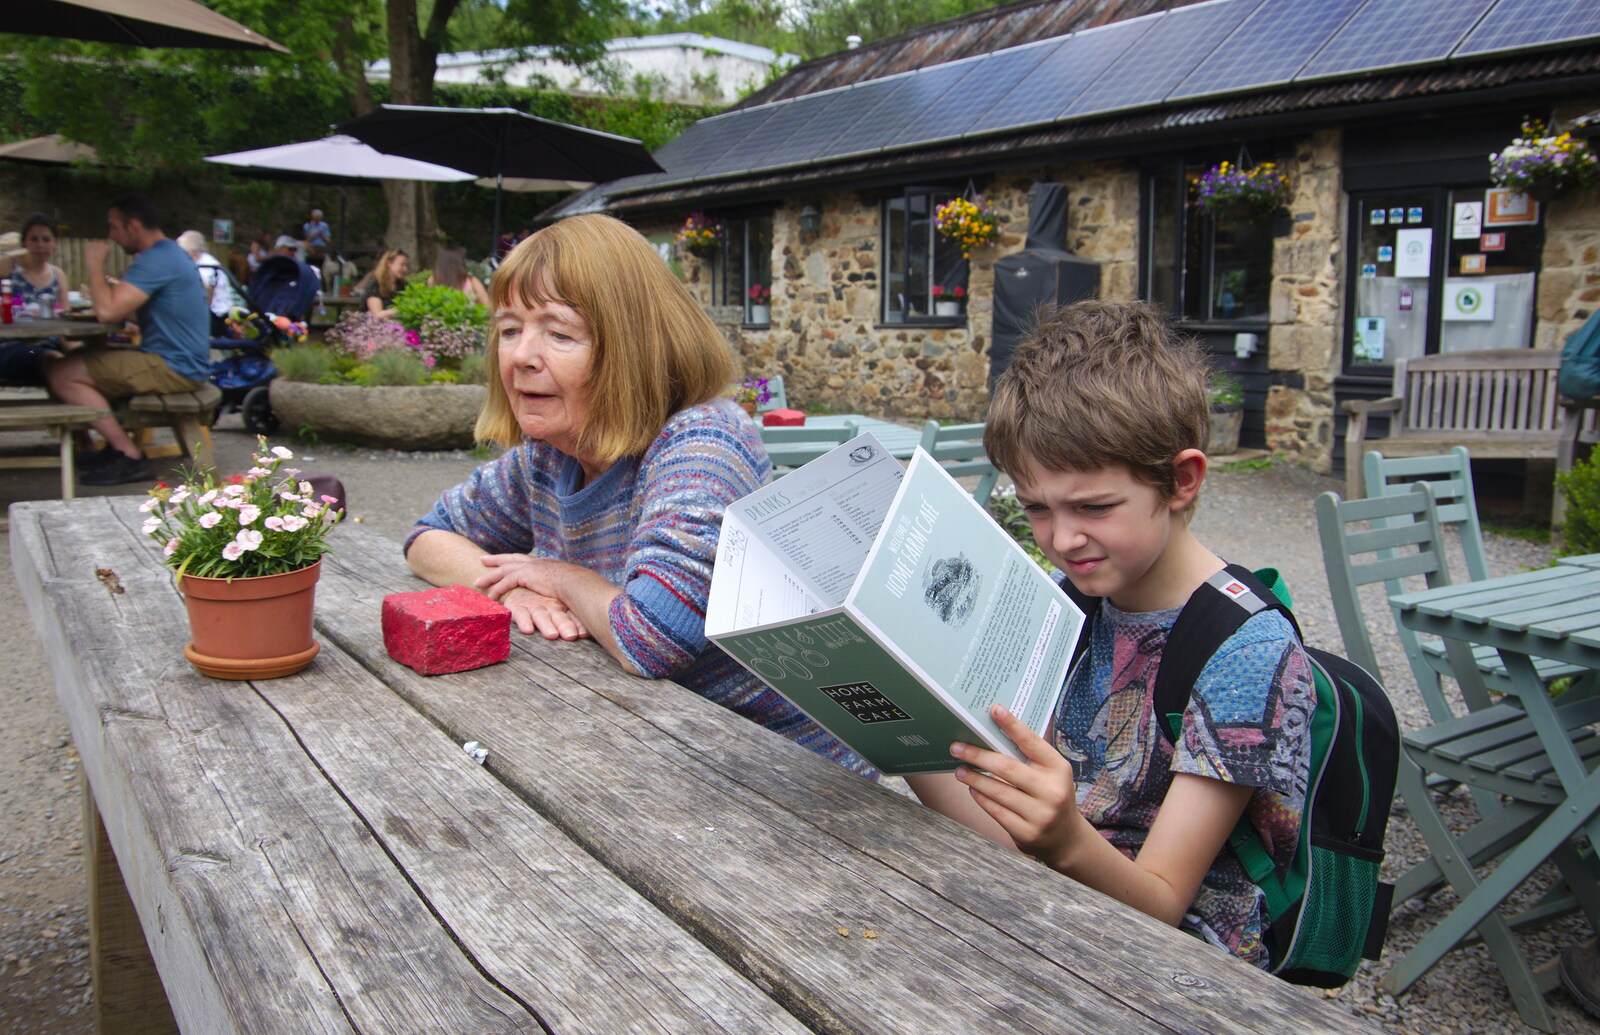 Chagford Lido and a Trip to Parke, Bovey Tracey, Devon - 25th May 2019: Fred looks at the menu suspiciously